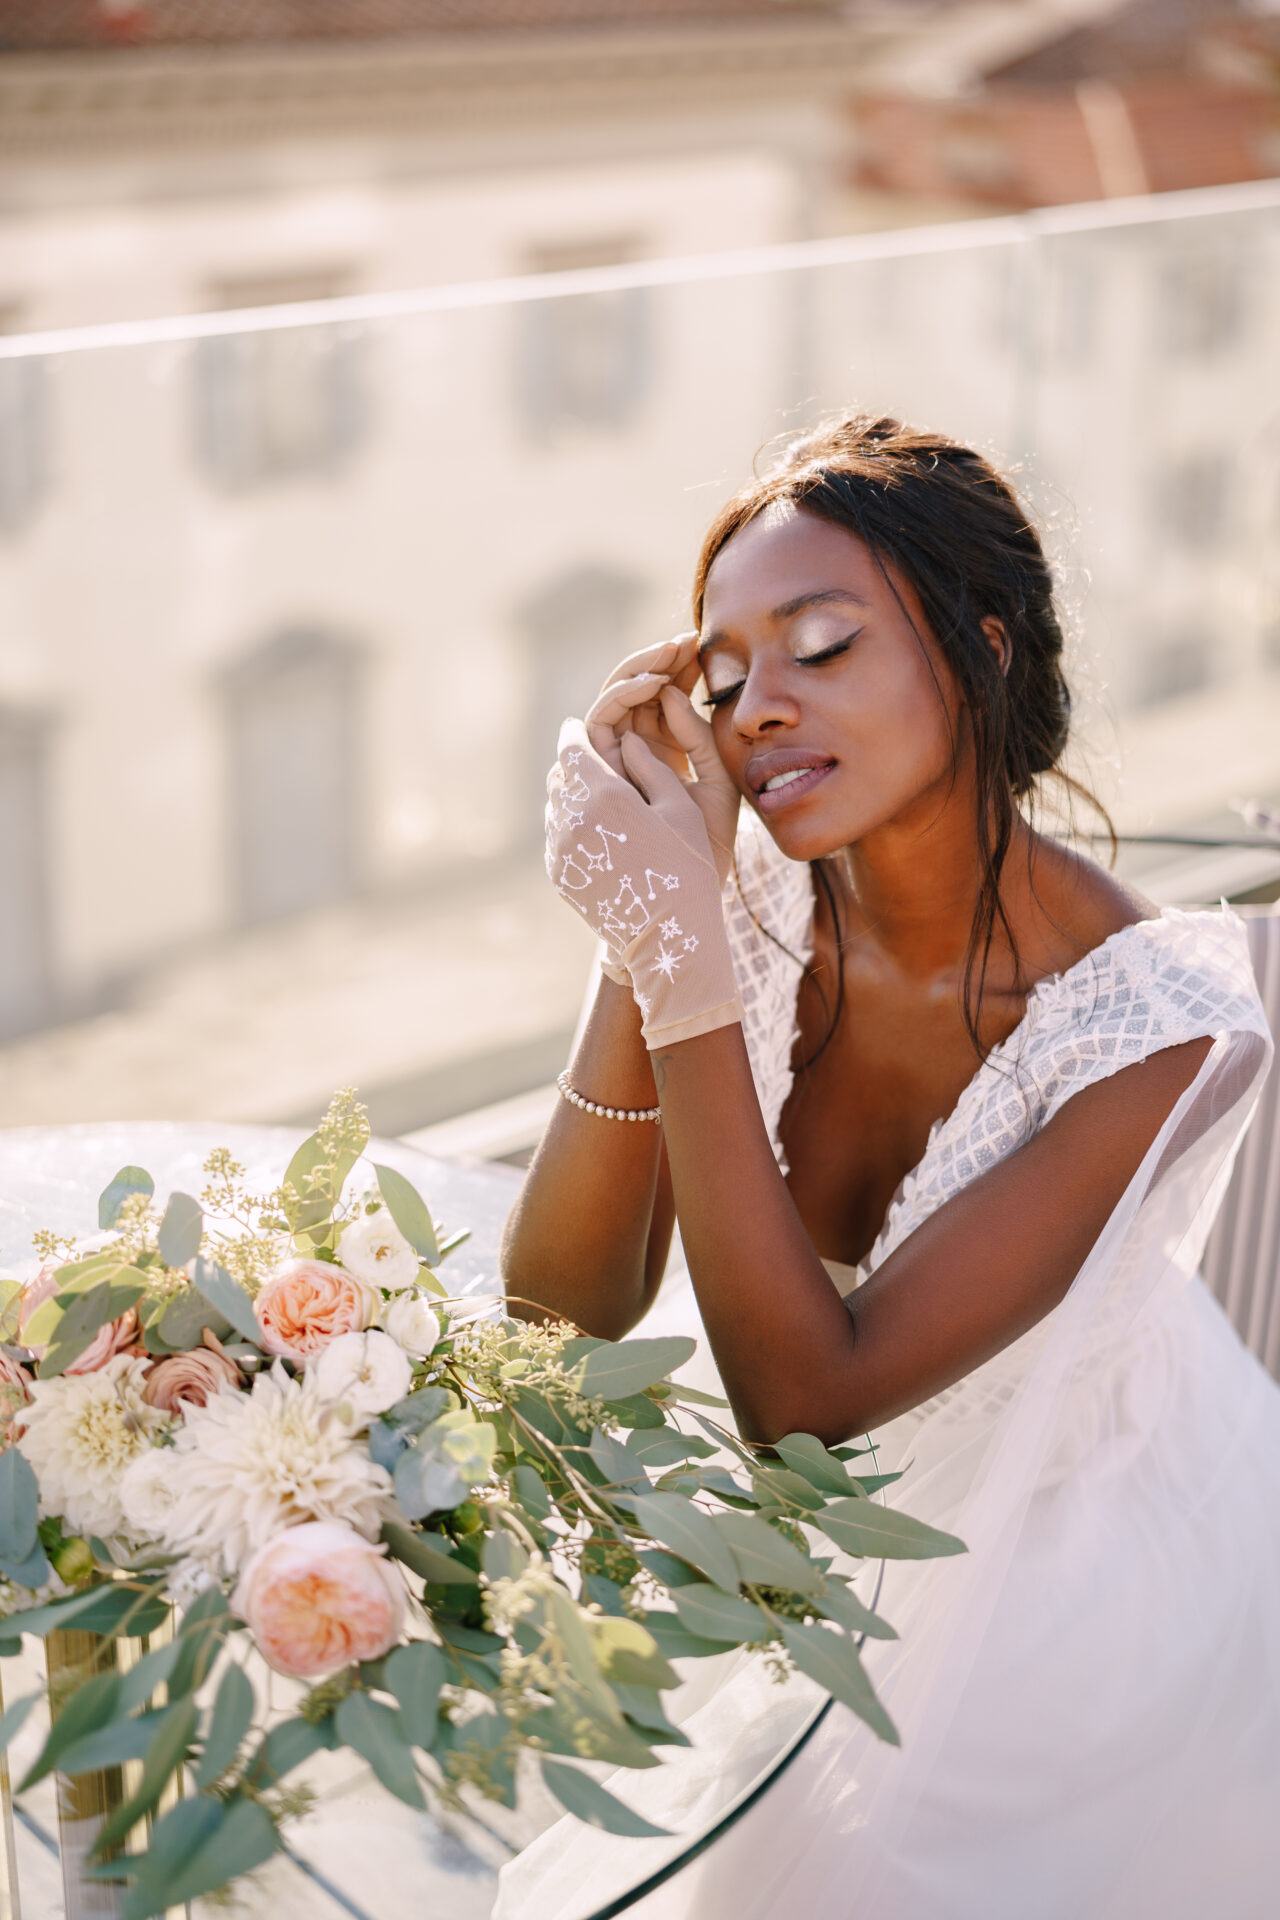 African-American bride sits at the table, touches her face with gloves in her hands with bouquet in front of h er